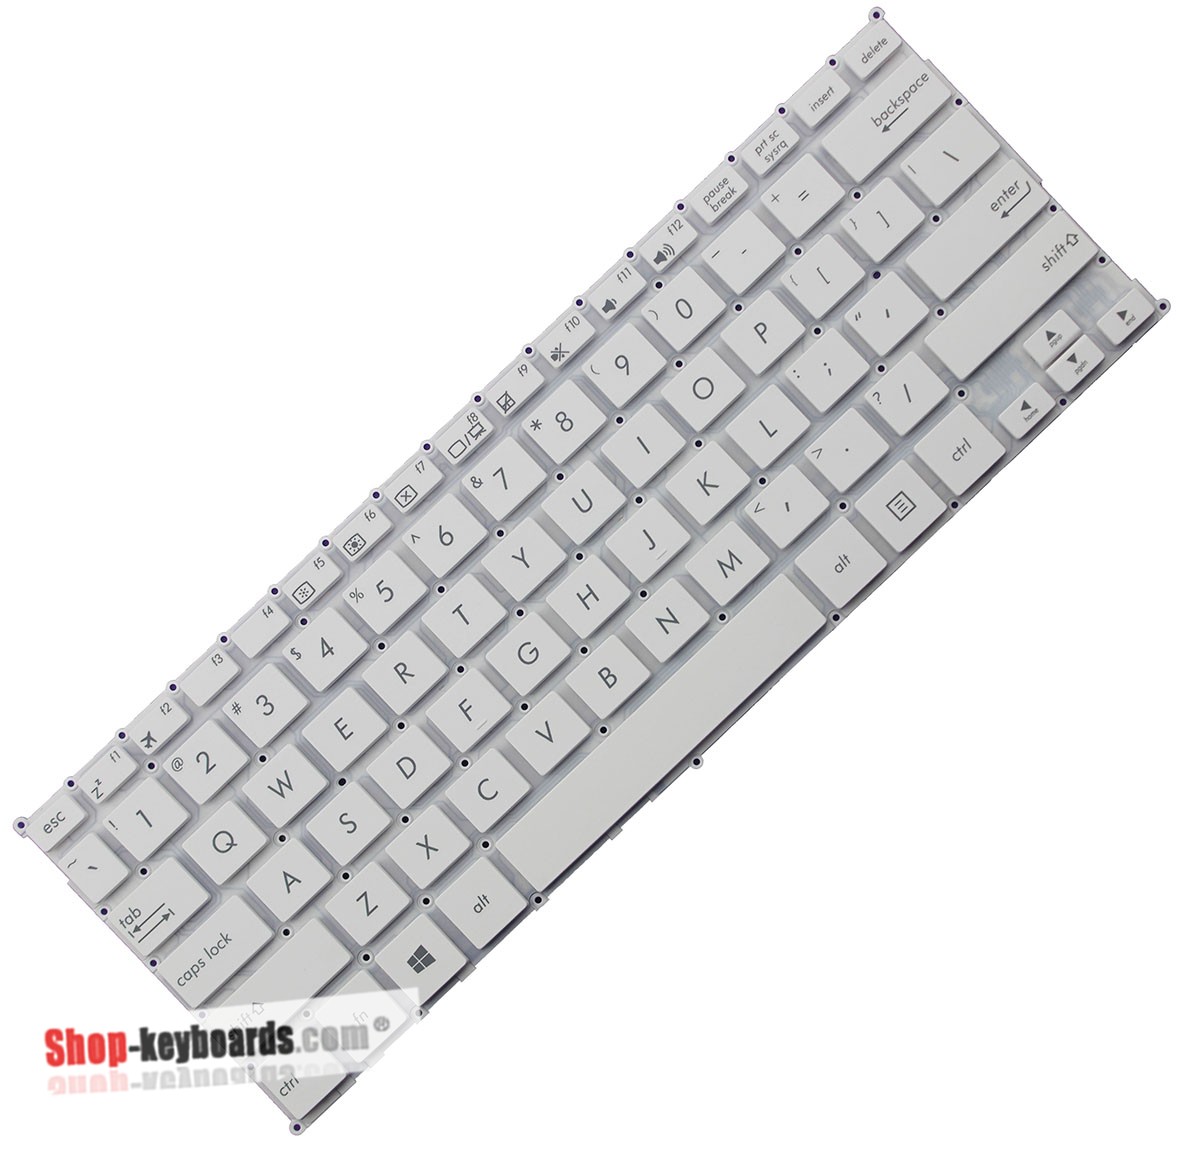 Asus 0KNL0-1122SP00 Keyboard replacement